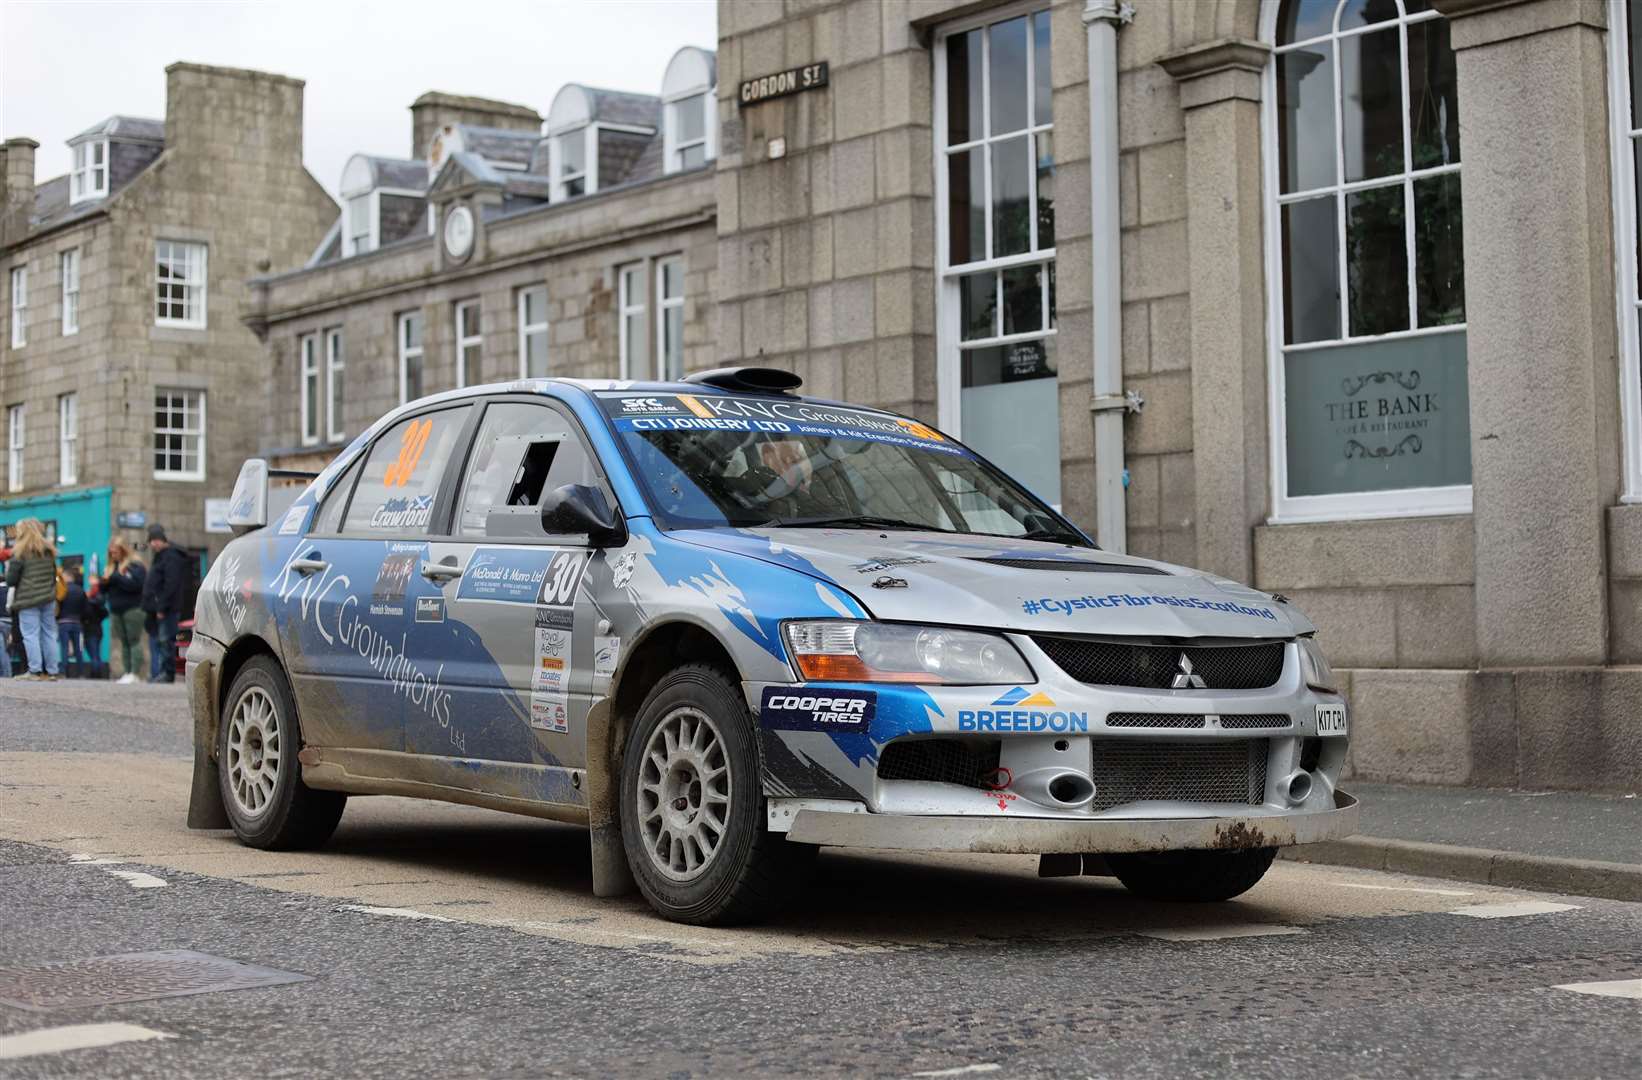 One of the rally cars in Huntly was driven by Kevin Crawford.